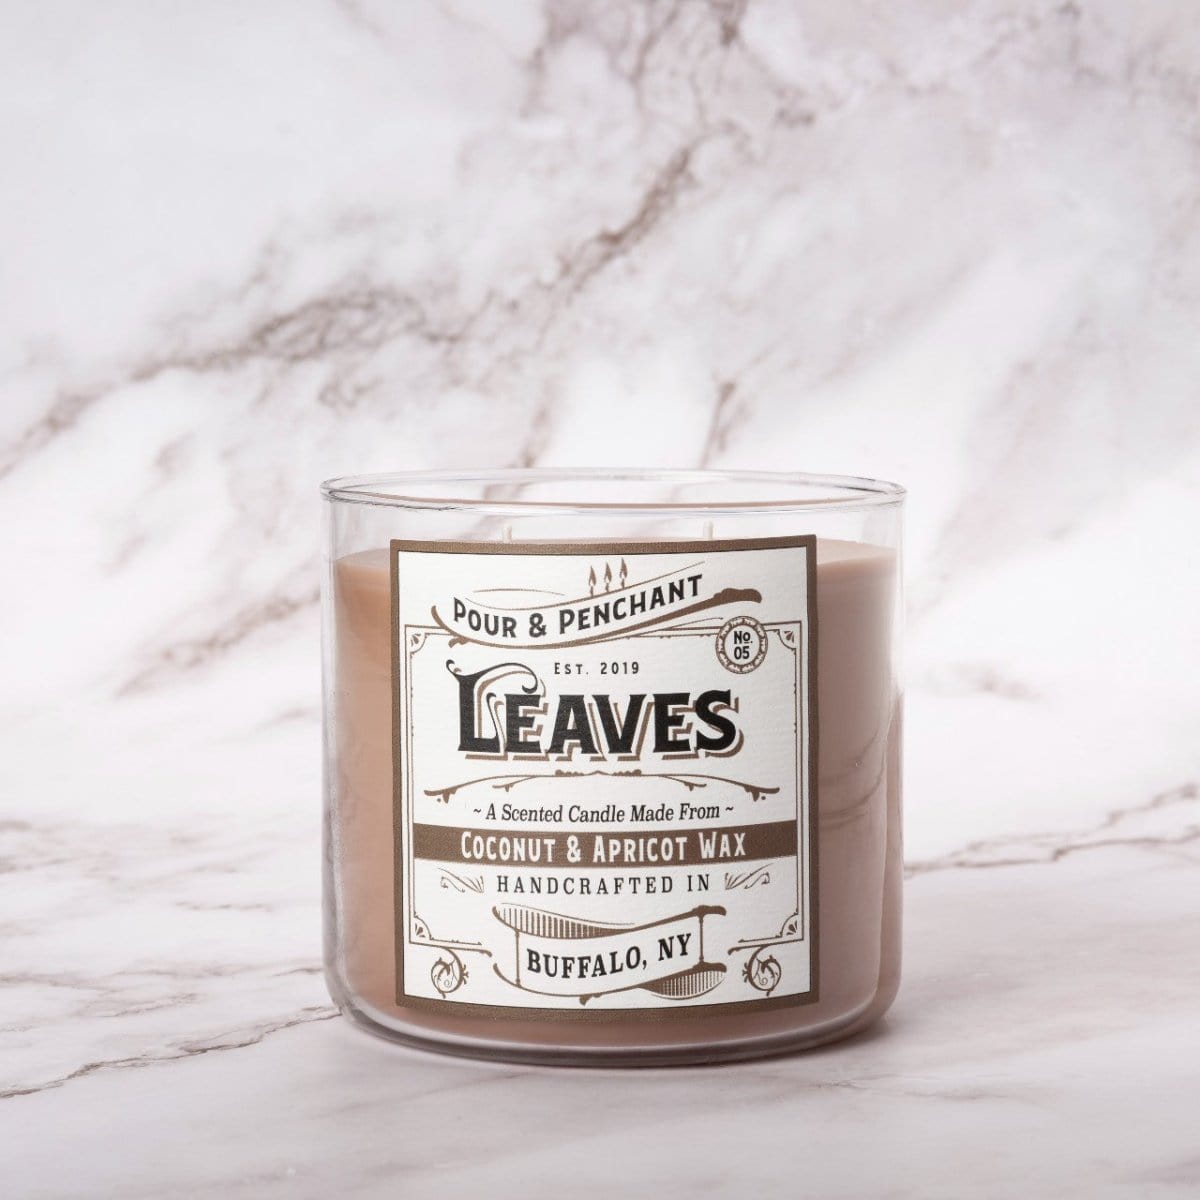 Pour & Penchant 16.5 oz Scented Candle - LEAVES no.05 - Cinnamon Leaf, Harvest Apple & Guaiacwood